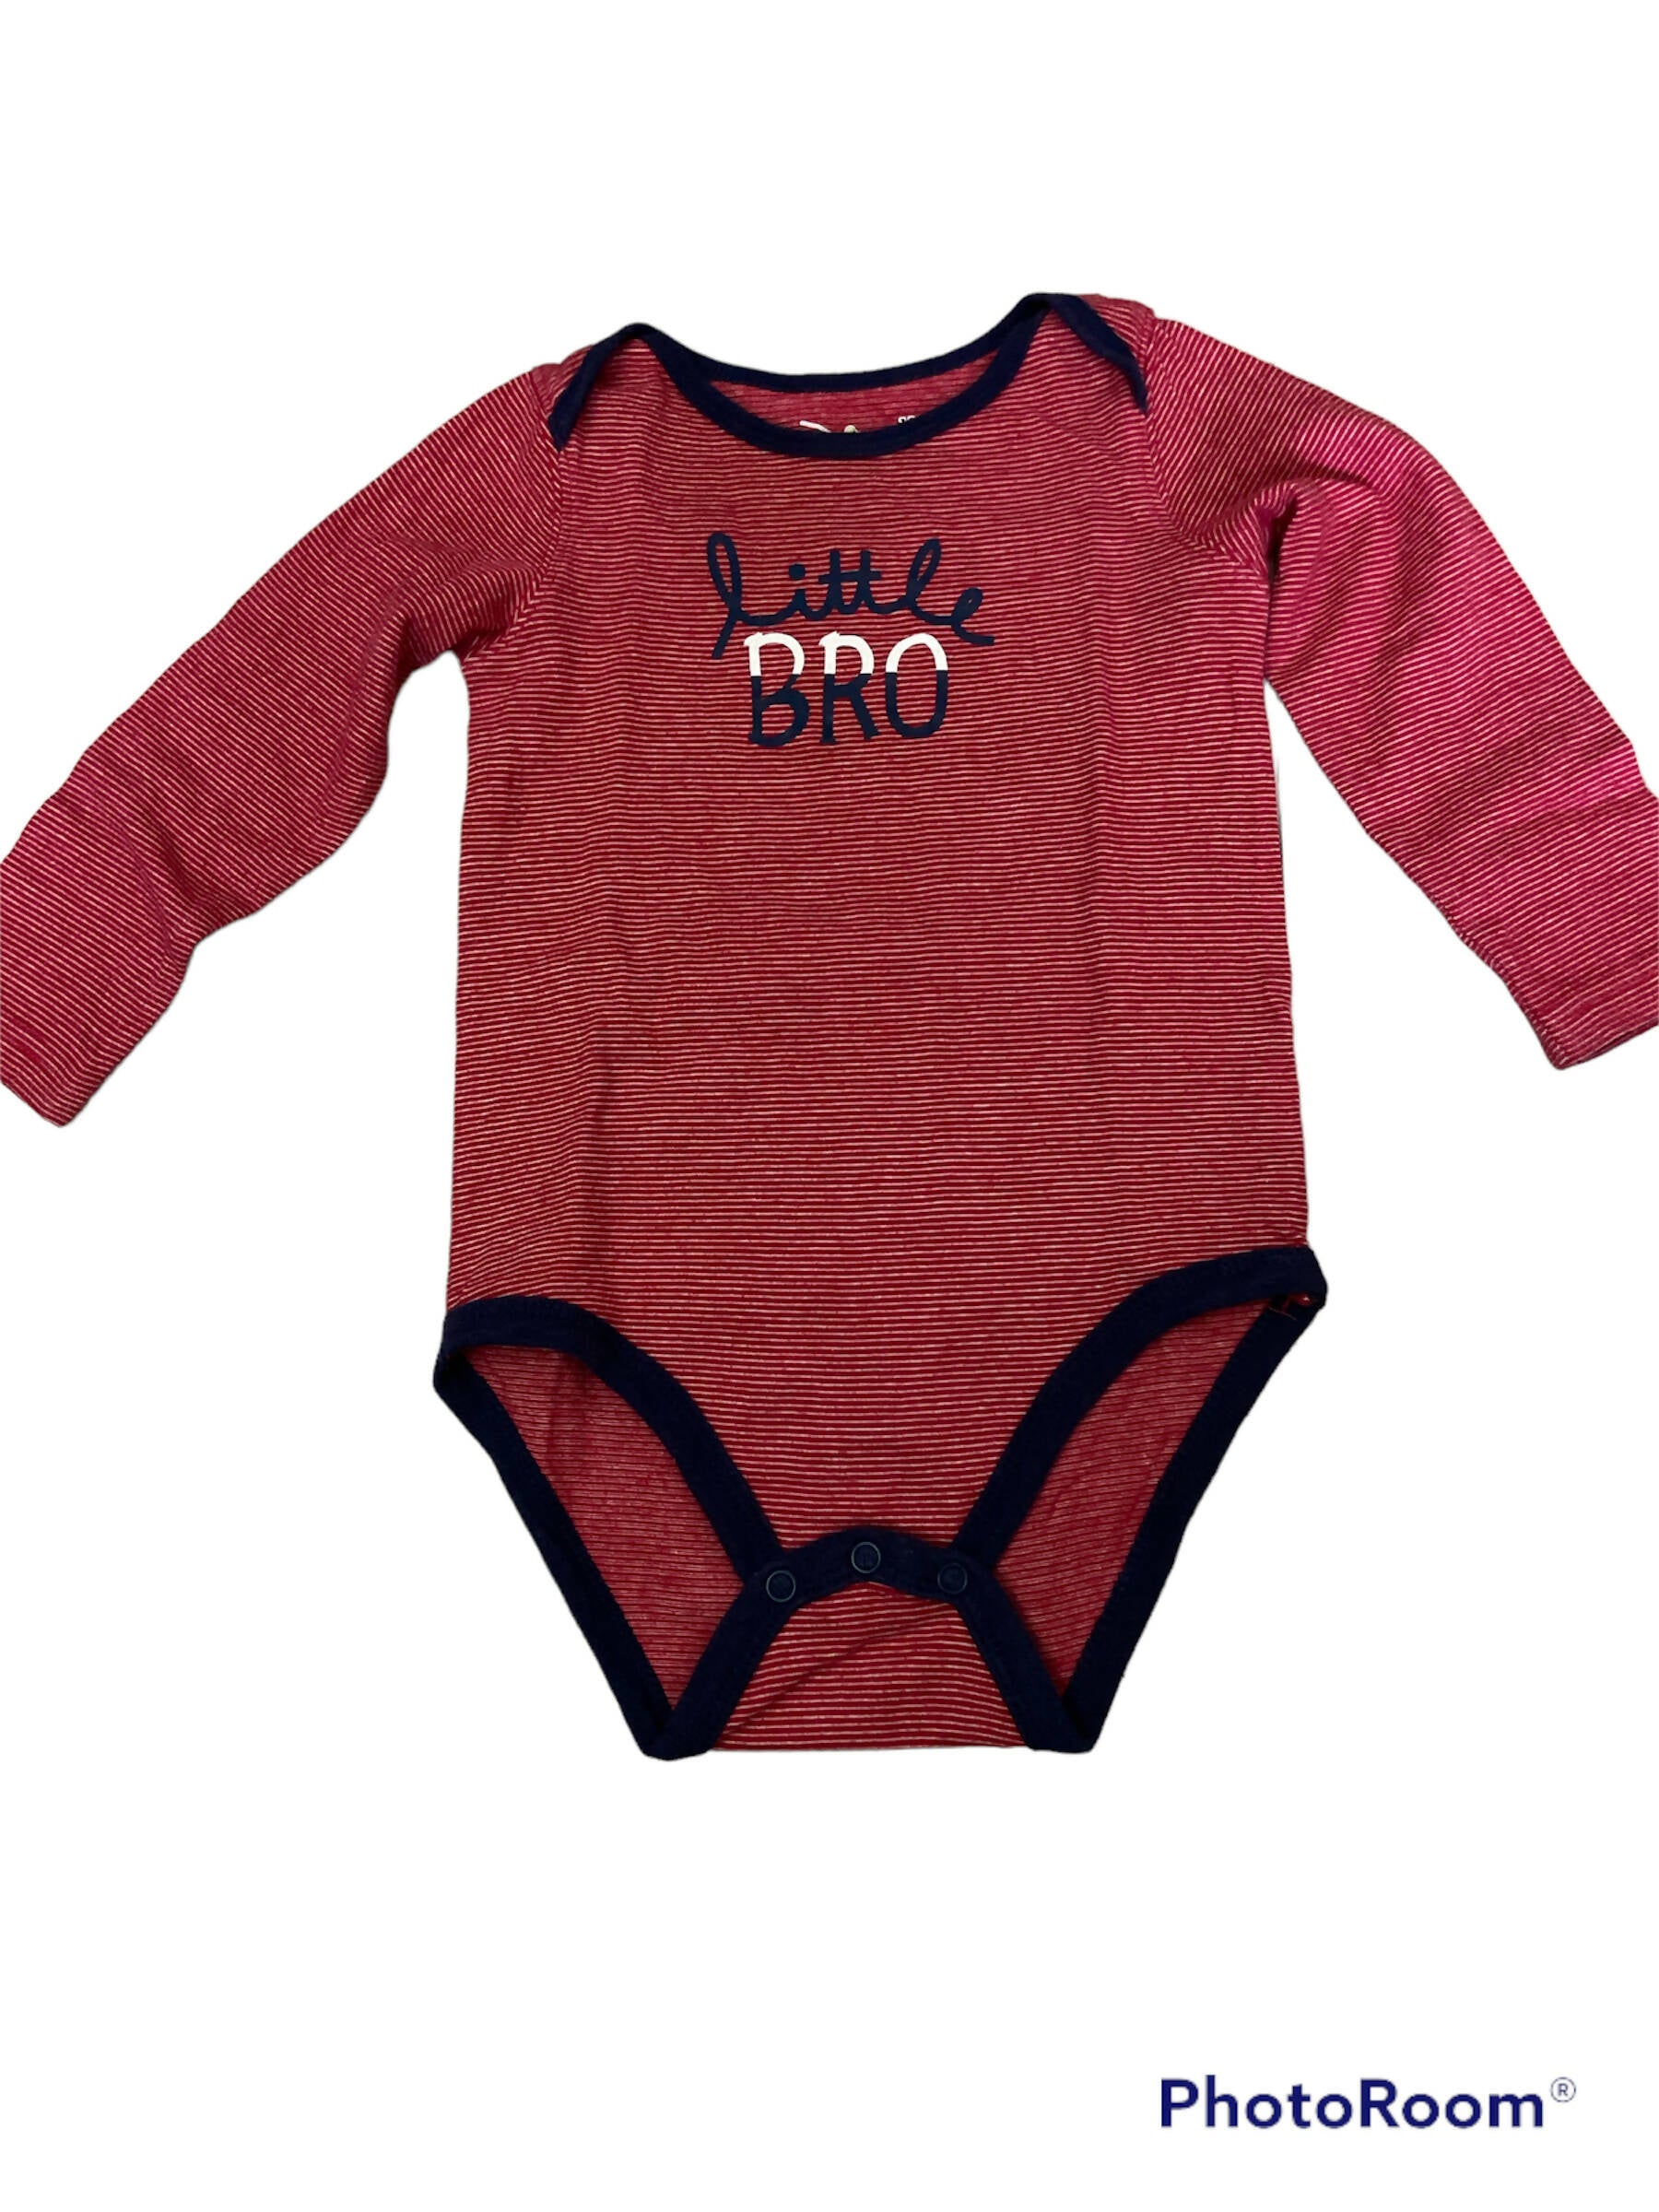 Jumping Beans Boys Body Suit (18 months) |Kids Bodysuits & Onesies | Preloved